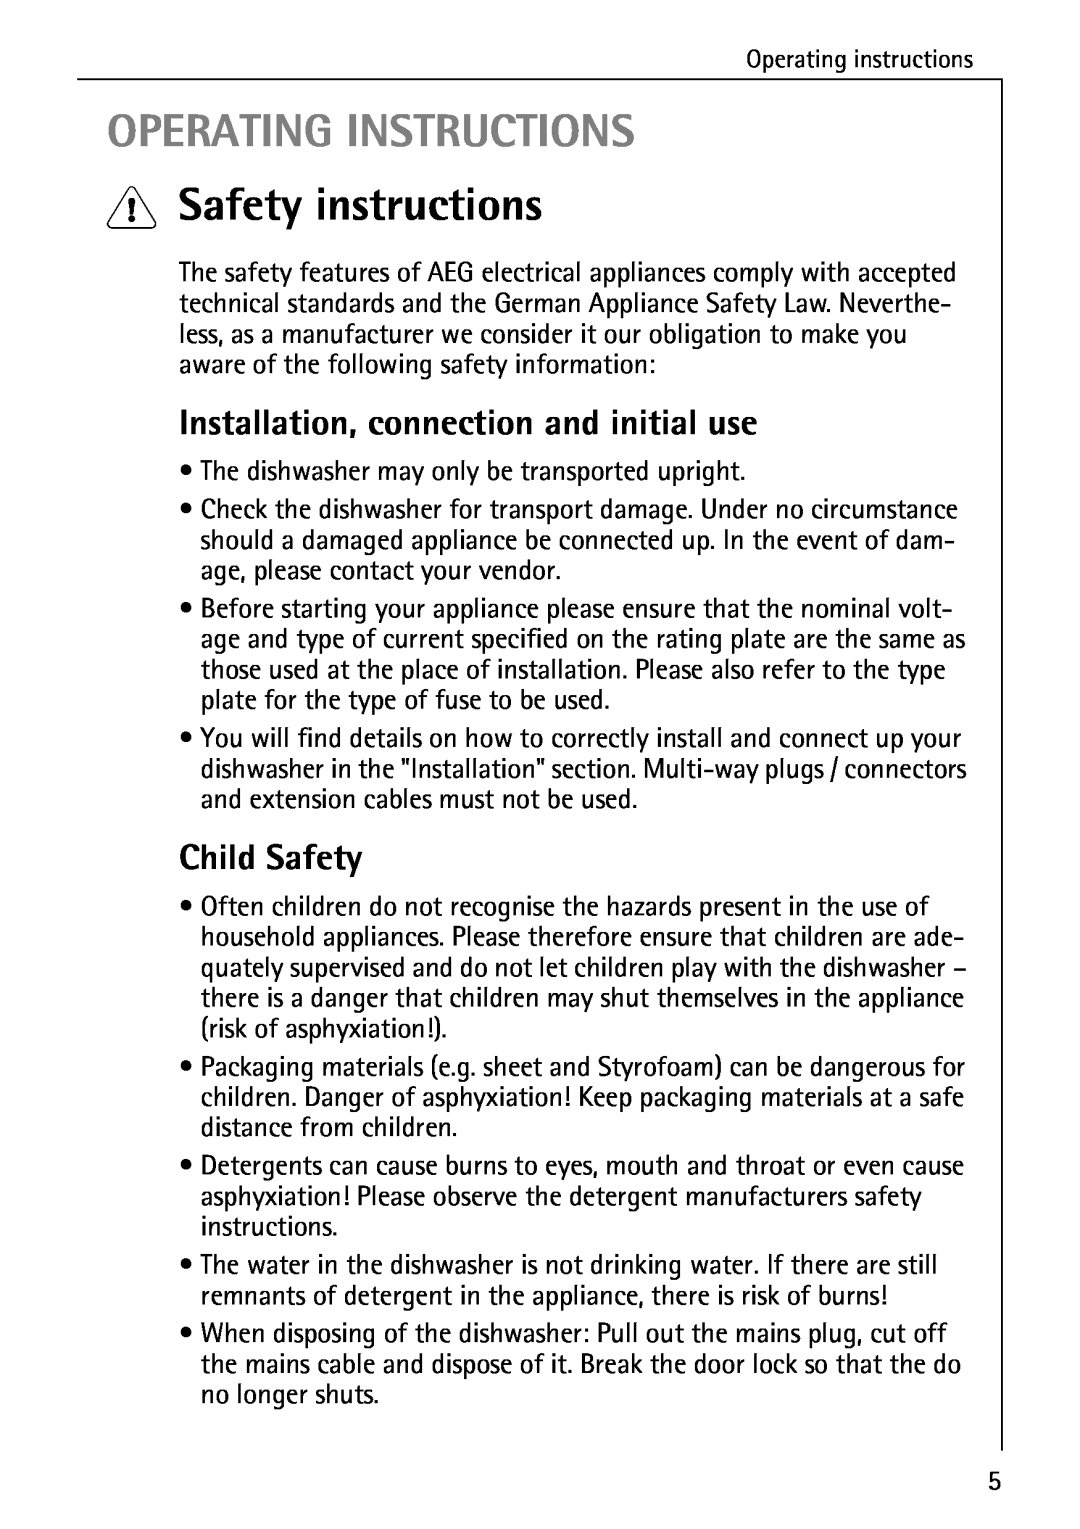 AEG 5071 manual Operating Instructions, Safety instructions, Installation, connection and initial use, Child Safety 